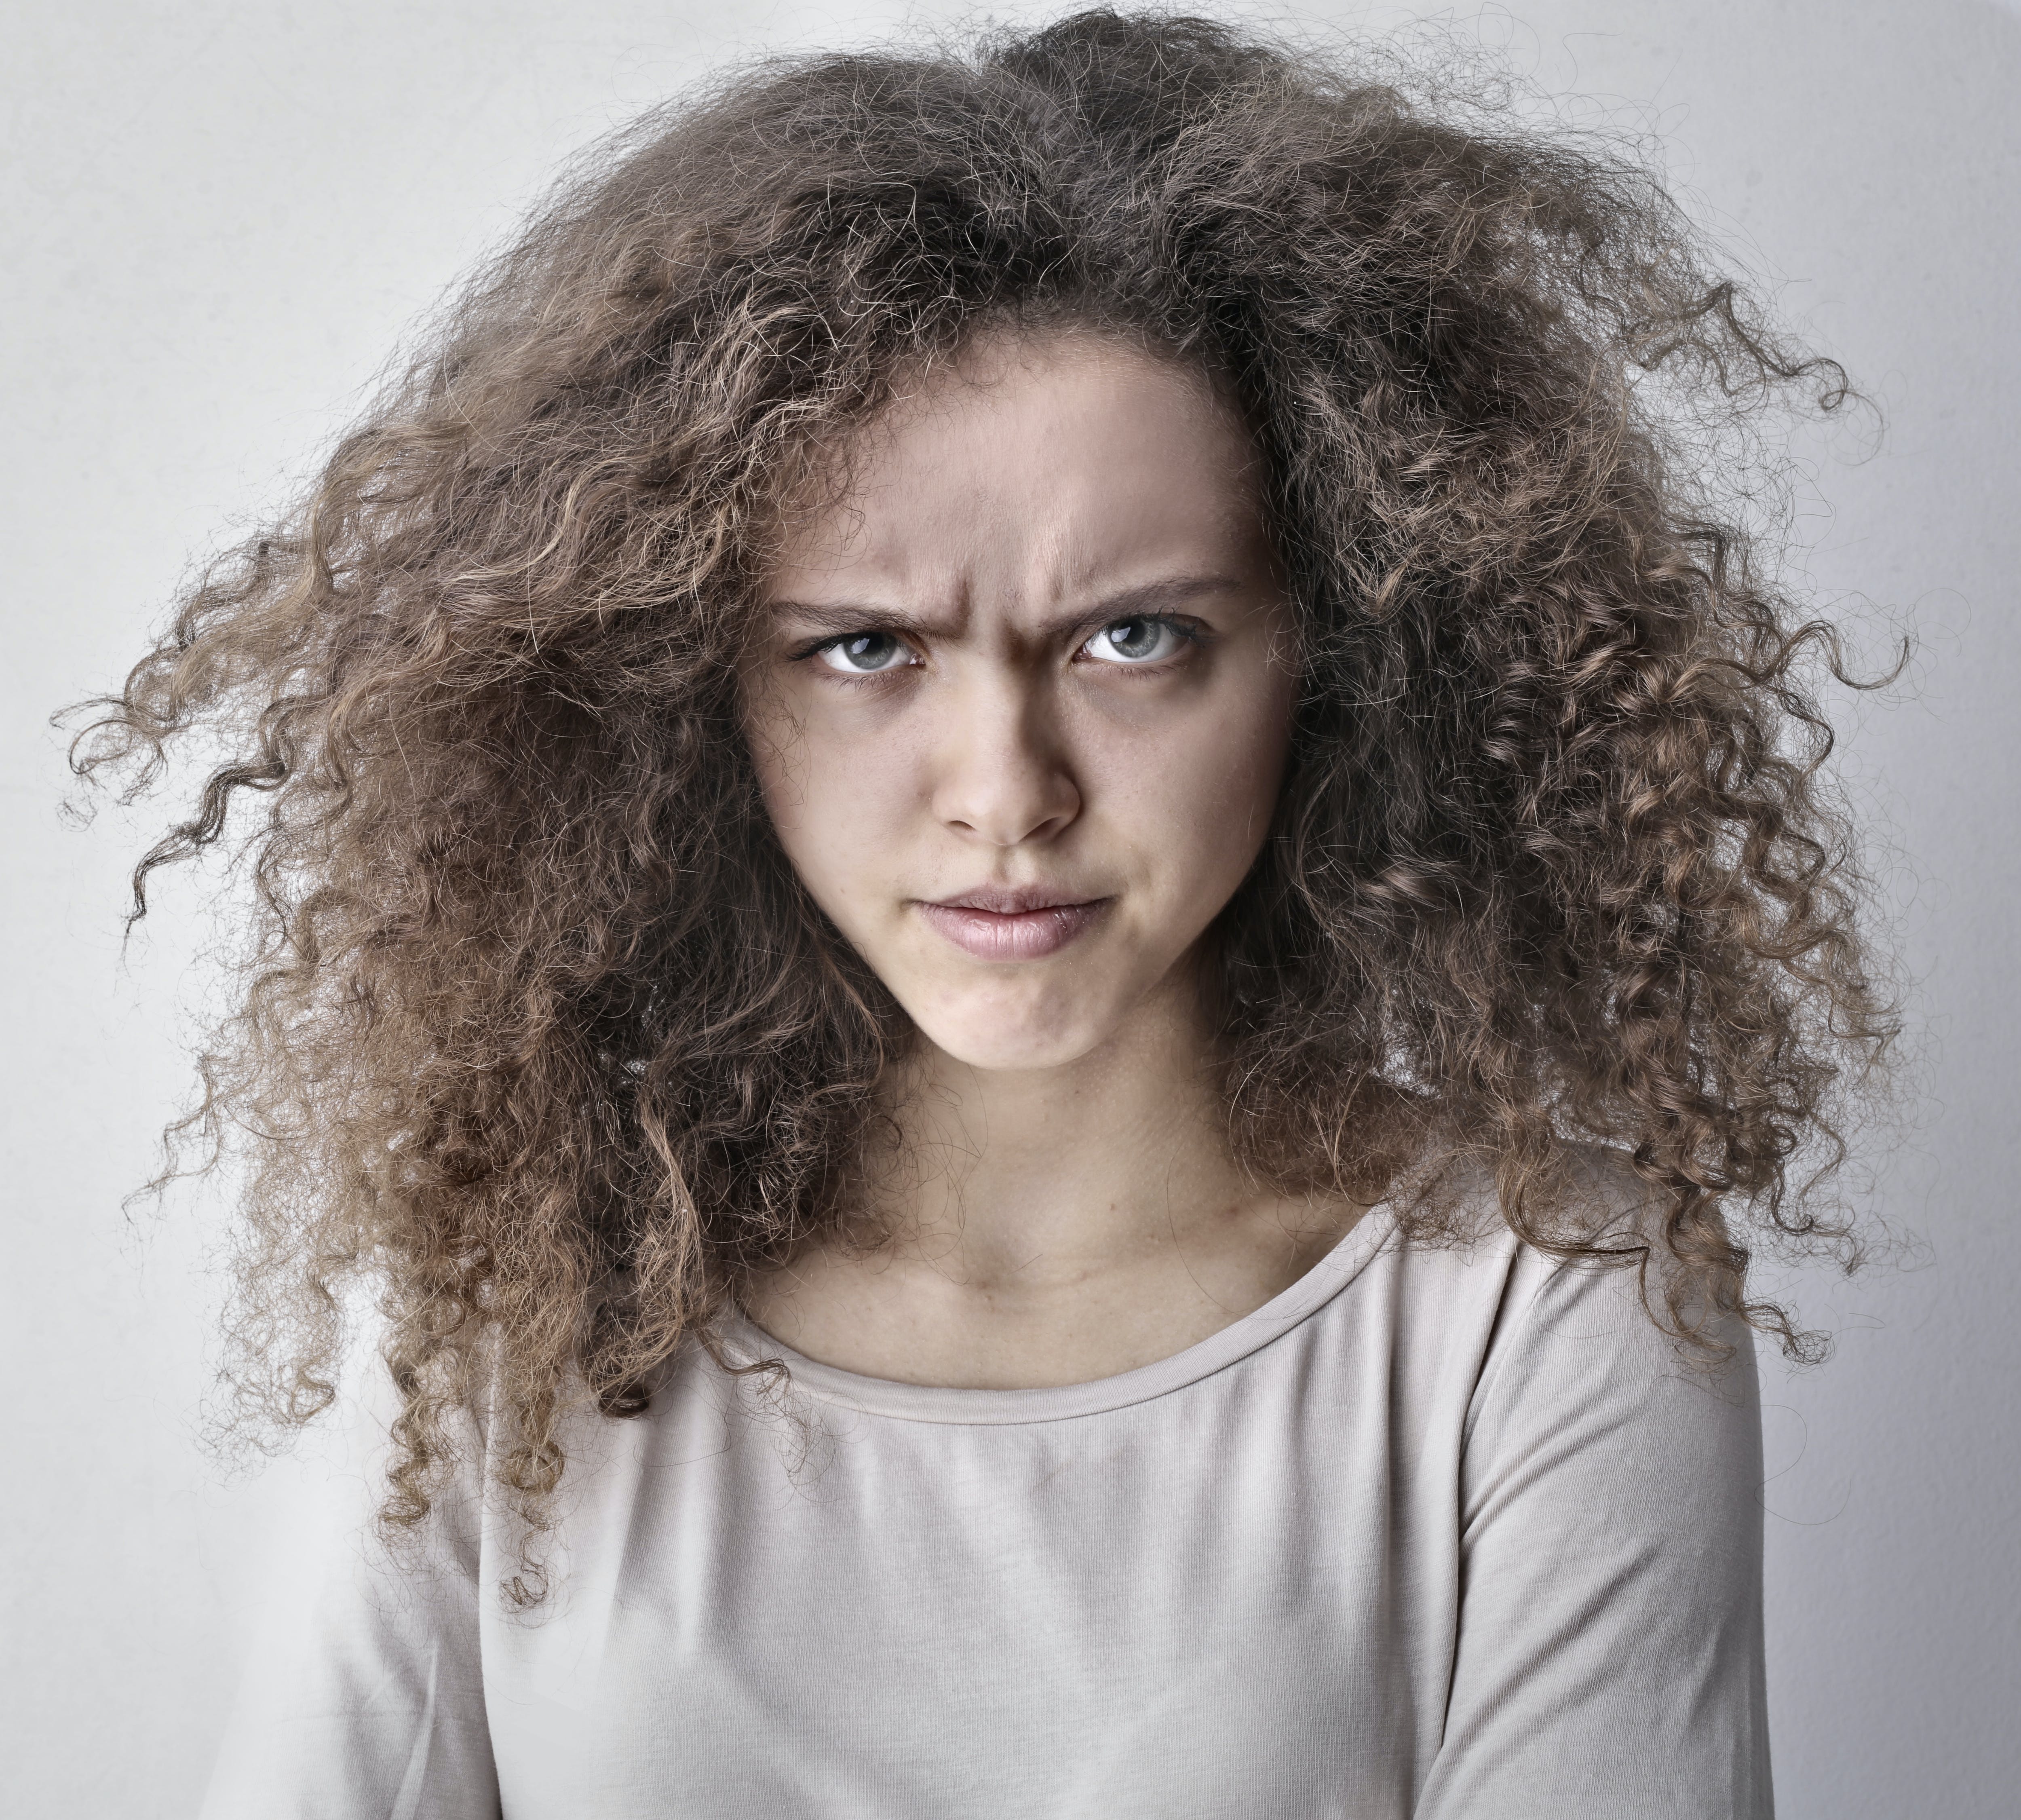 Photo of an Angry Woman. | Source: Pexels